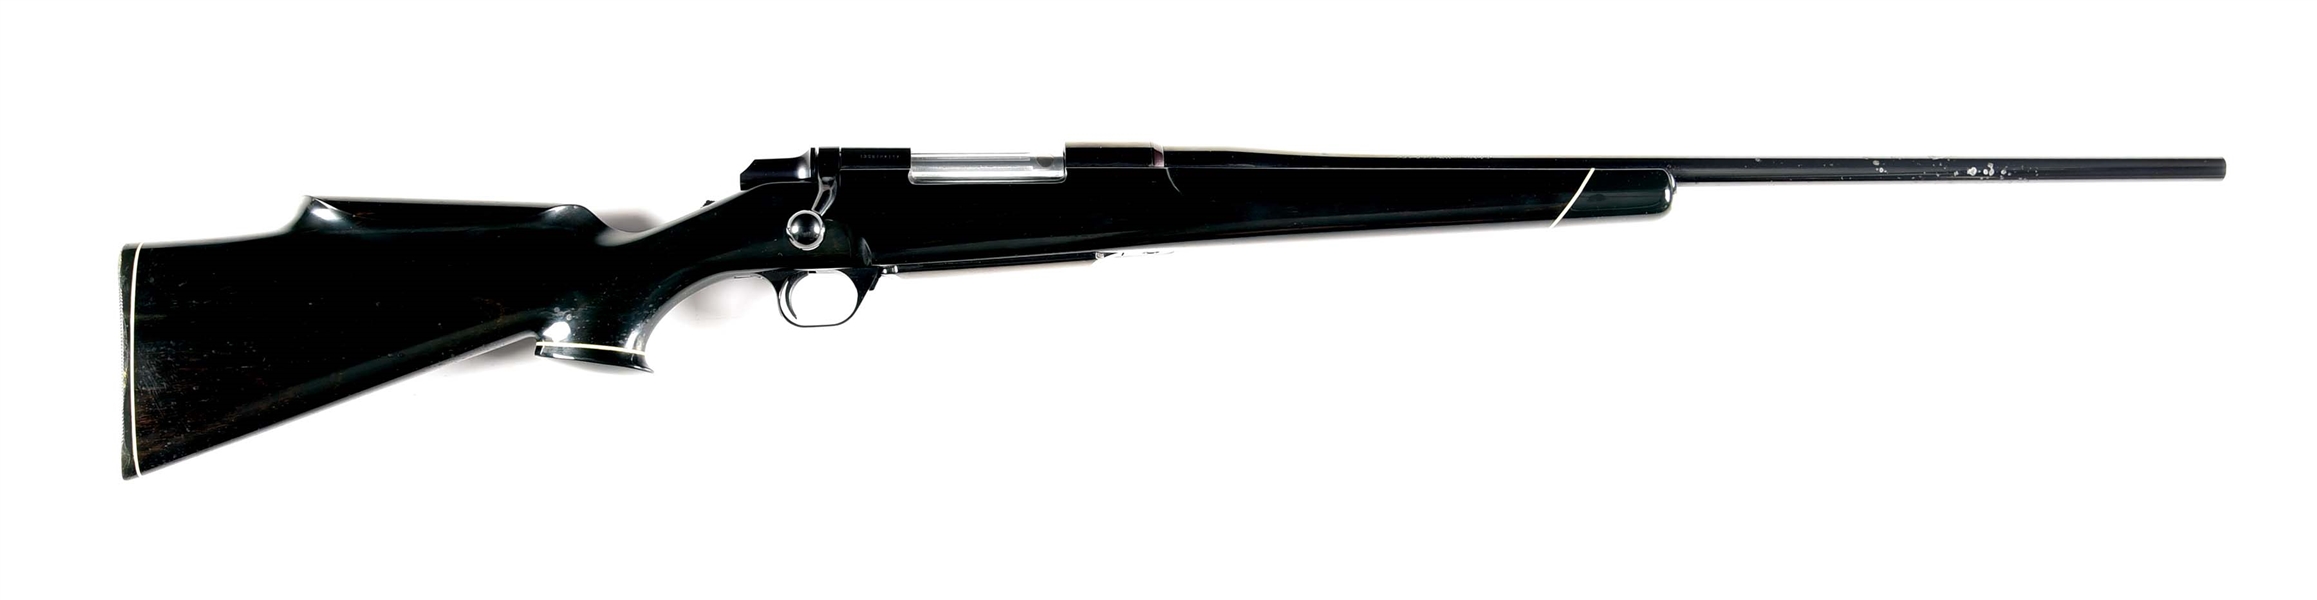 (M) EBONY CAMEROON STOCKED BROWNING BBR BOLT ACTION RIFLE.